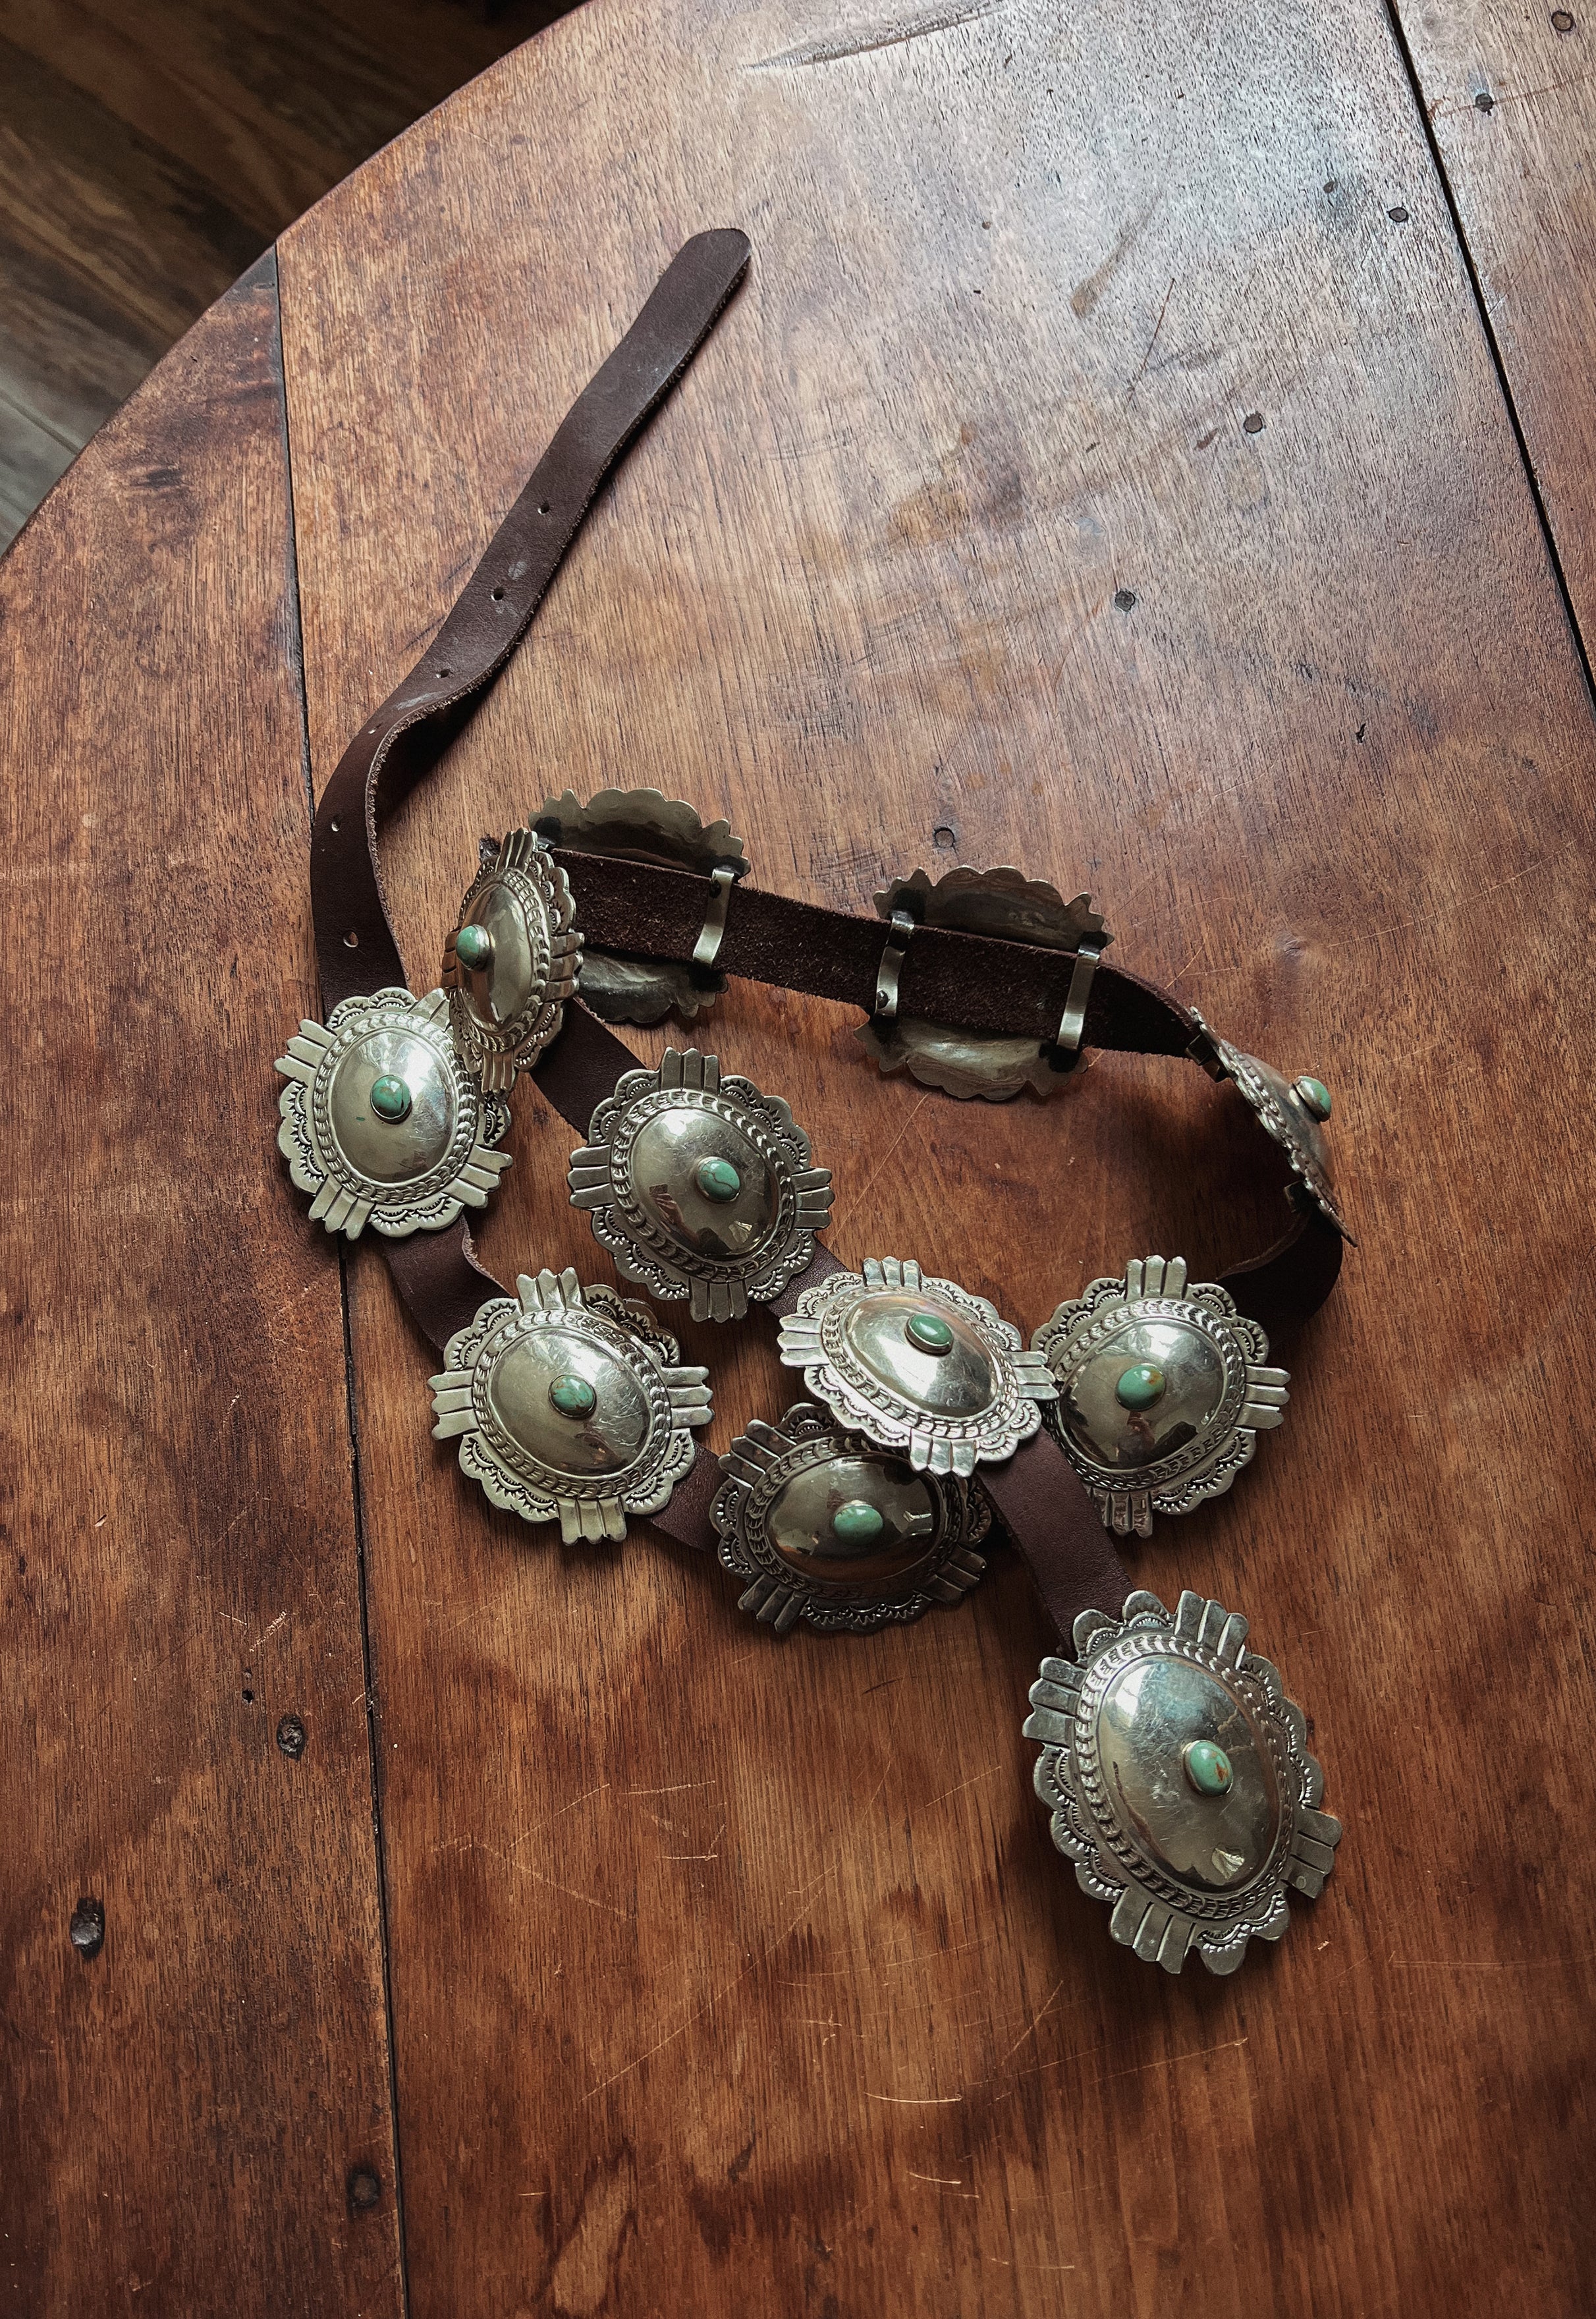 Christie Araujo Vintage Silver and Turquoise Concho Belt on Tobacco Leather